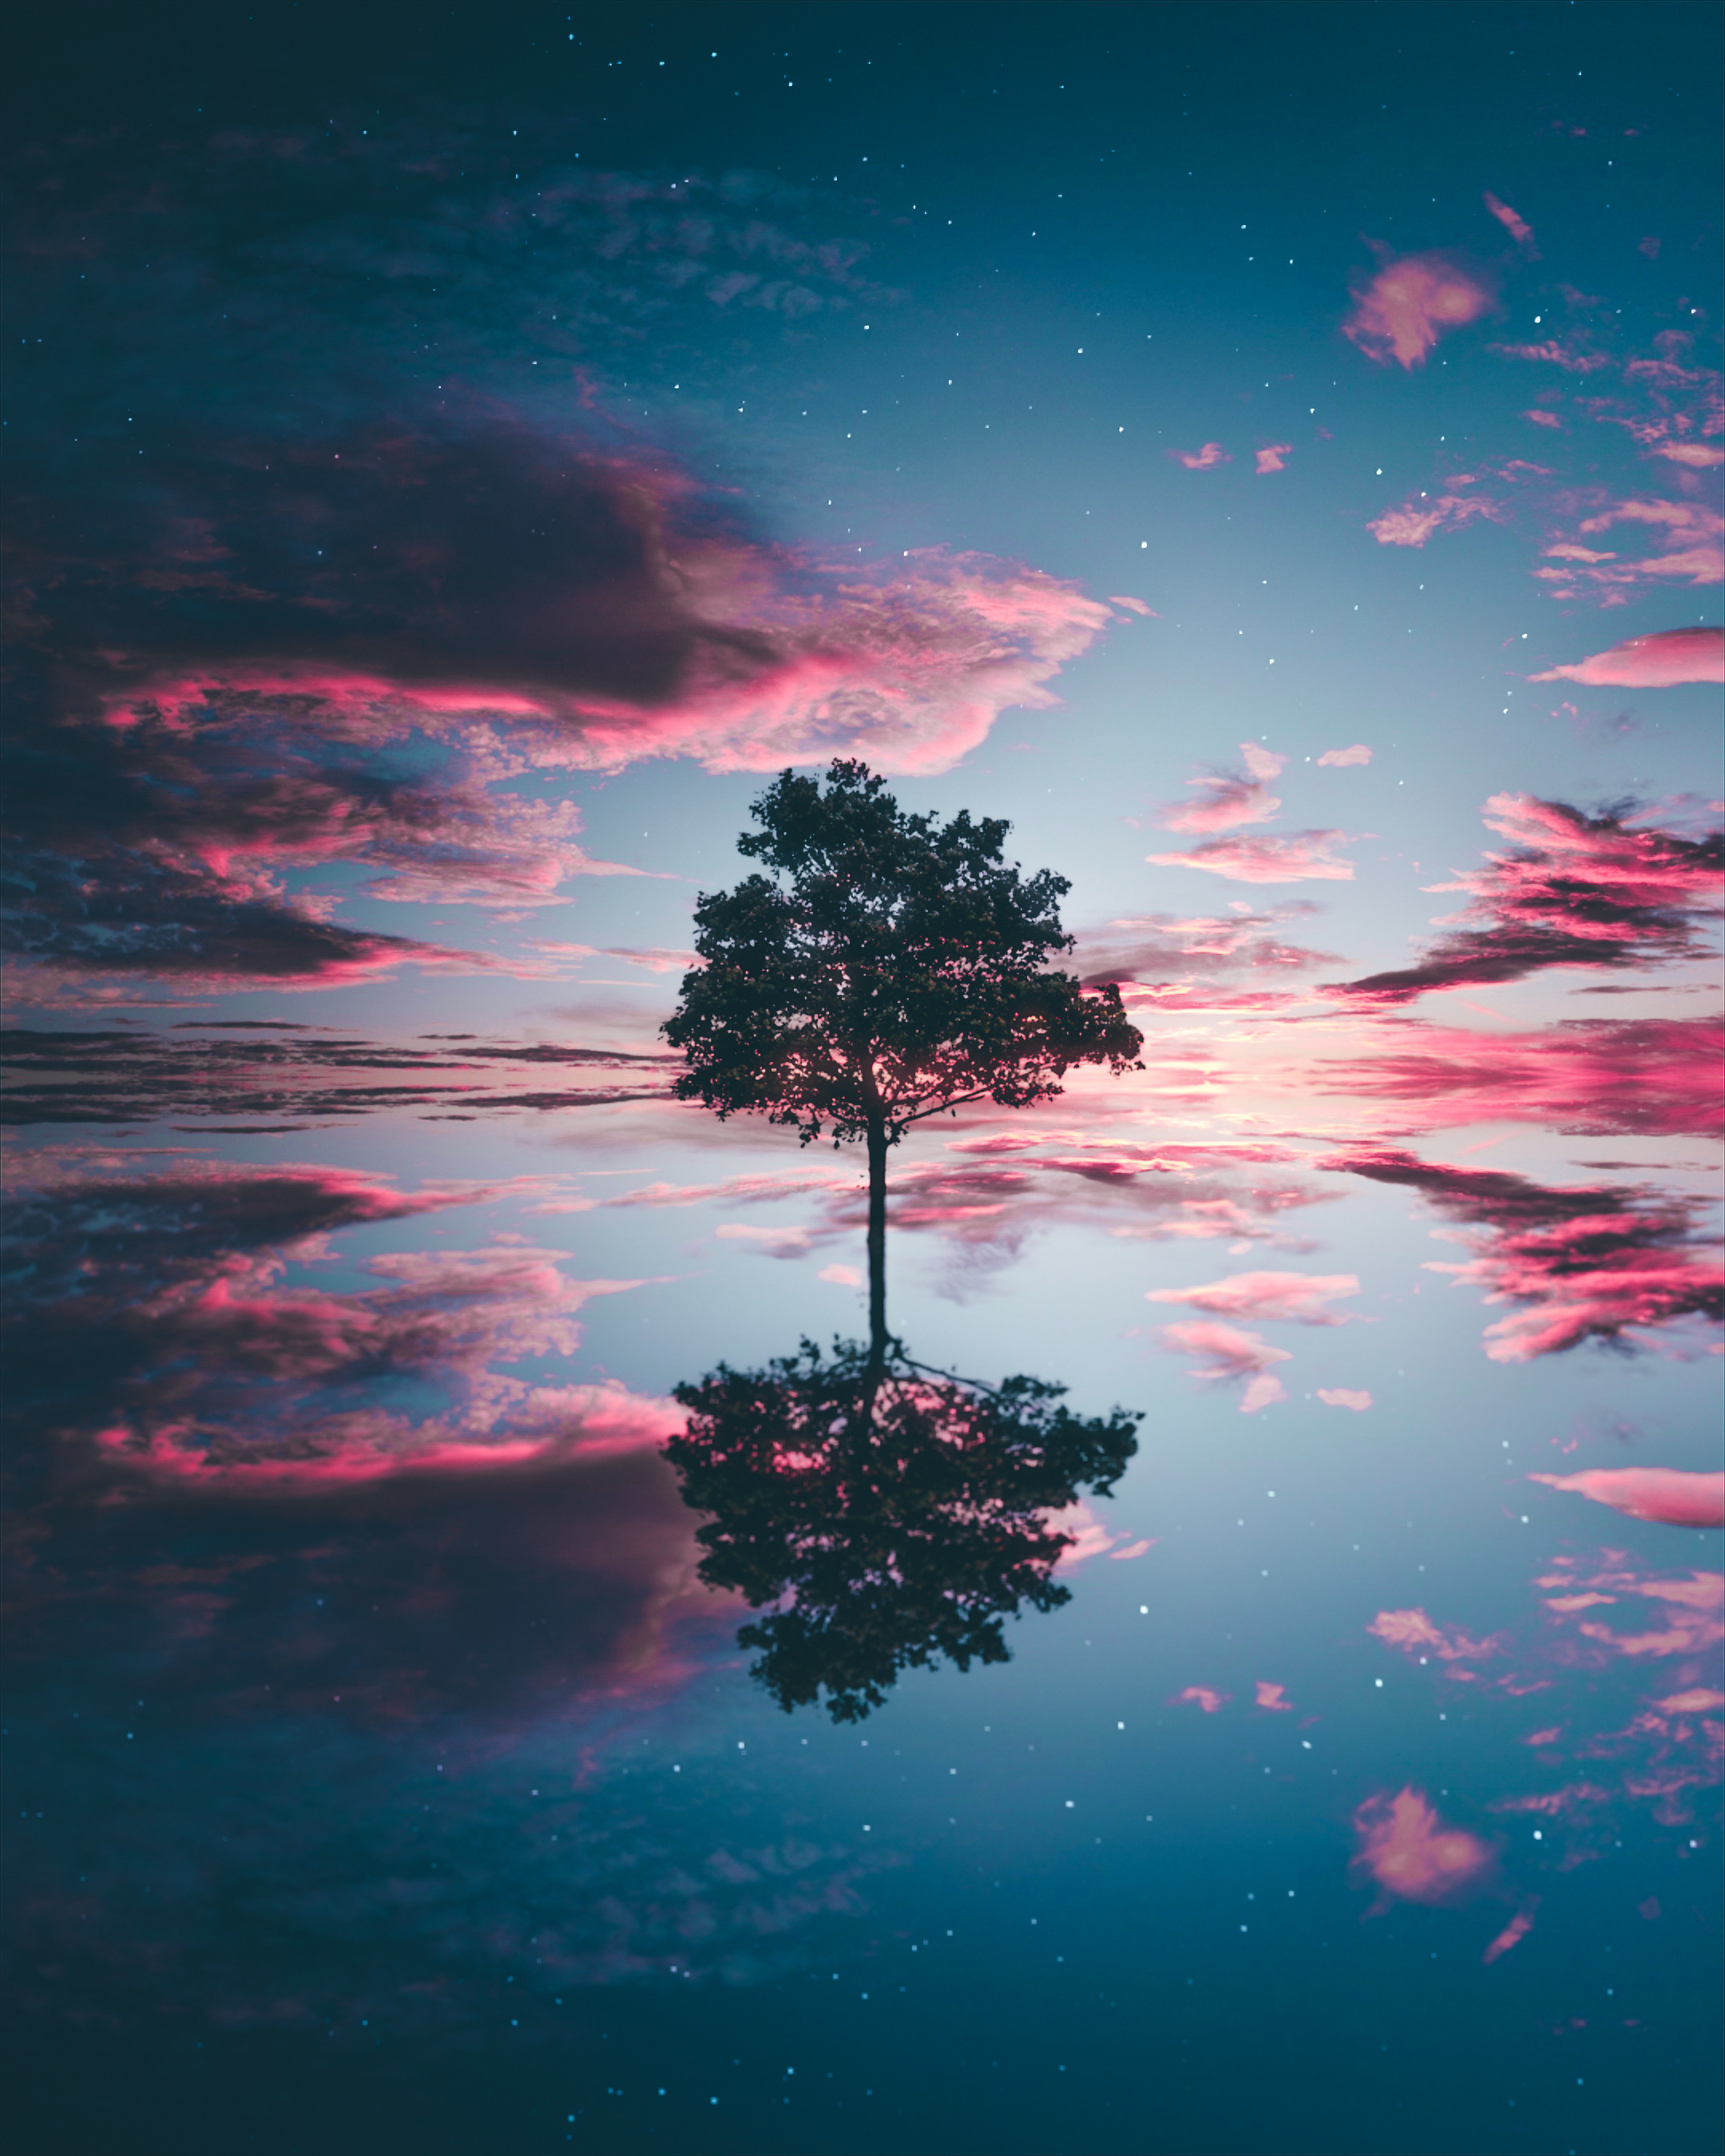 General 2160x2700 stars nature sky reflection water clouds symmetry trees pink low light portrait display